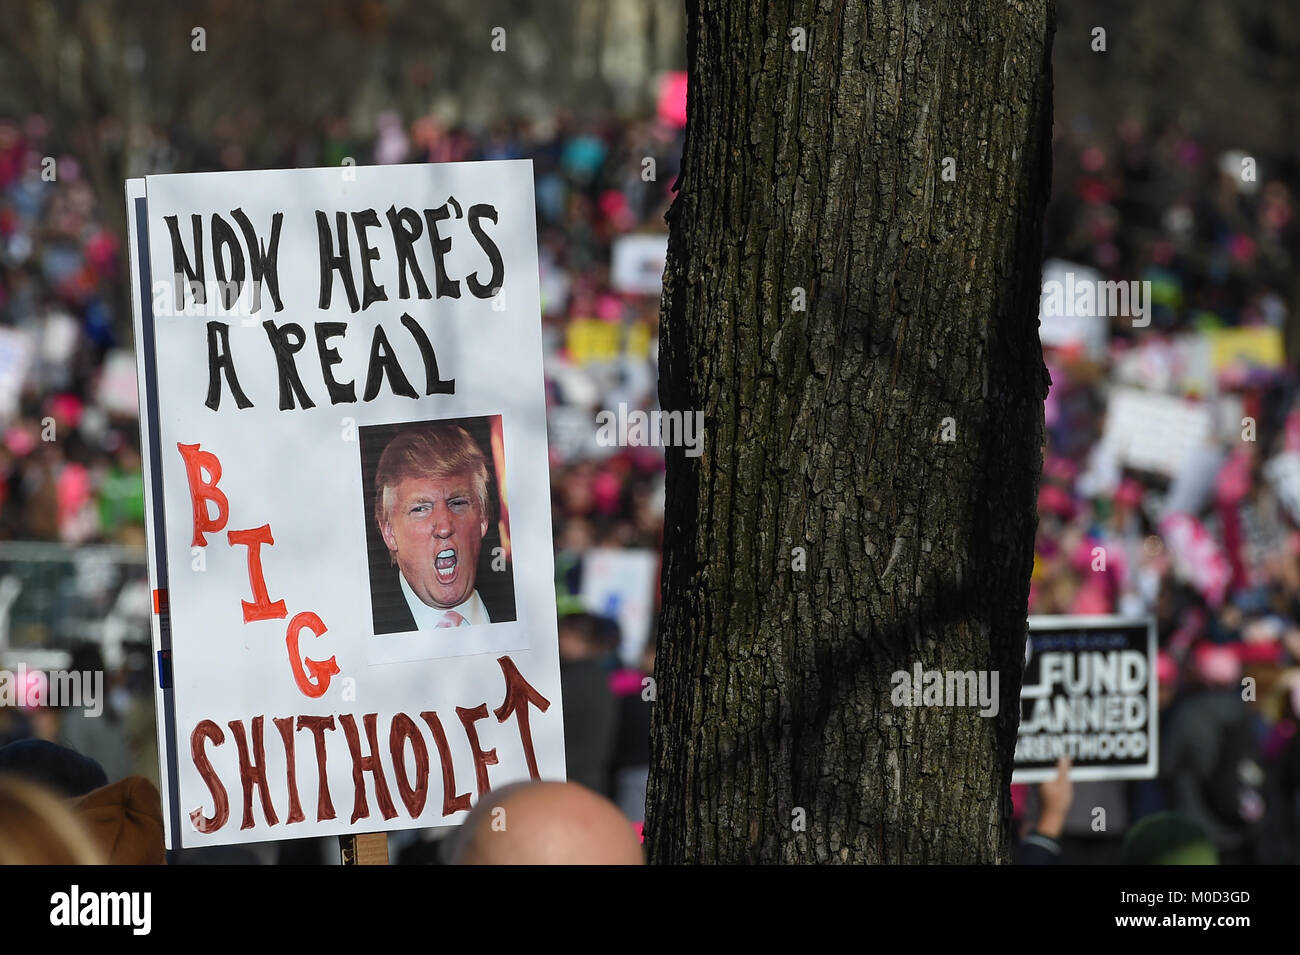 Washington DC, USA. 20th Jan, 2018. Jan. 20th Jan, 2018. A marcher holds their anti-trump sign high during the Women's March around Lincoln Memorial in Washington, DC, on Jan. 20, 2018 in Washington Credit: csm/Alamy Live News Credit: Cal Sport Media/Alamy Live News Stock Photo